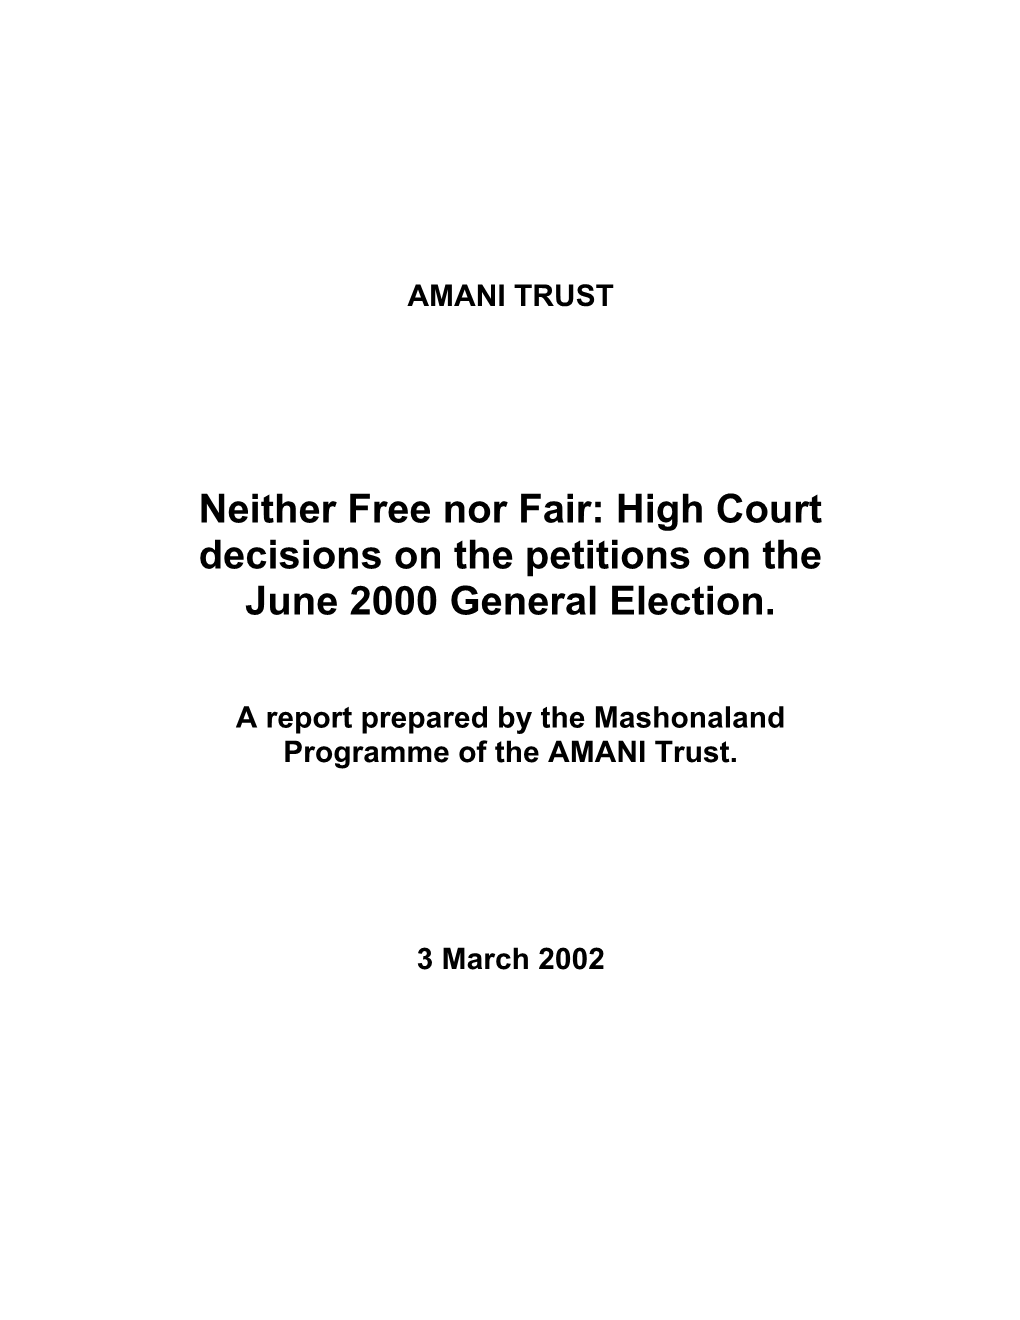 Neither Free Nor Fair: High Court Decisions on the Petitions on the June 2000 General Election